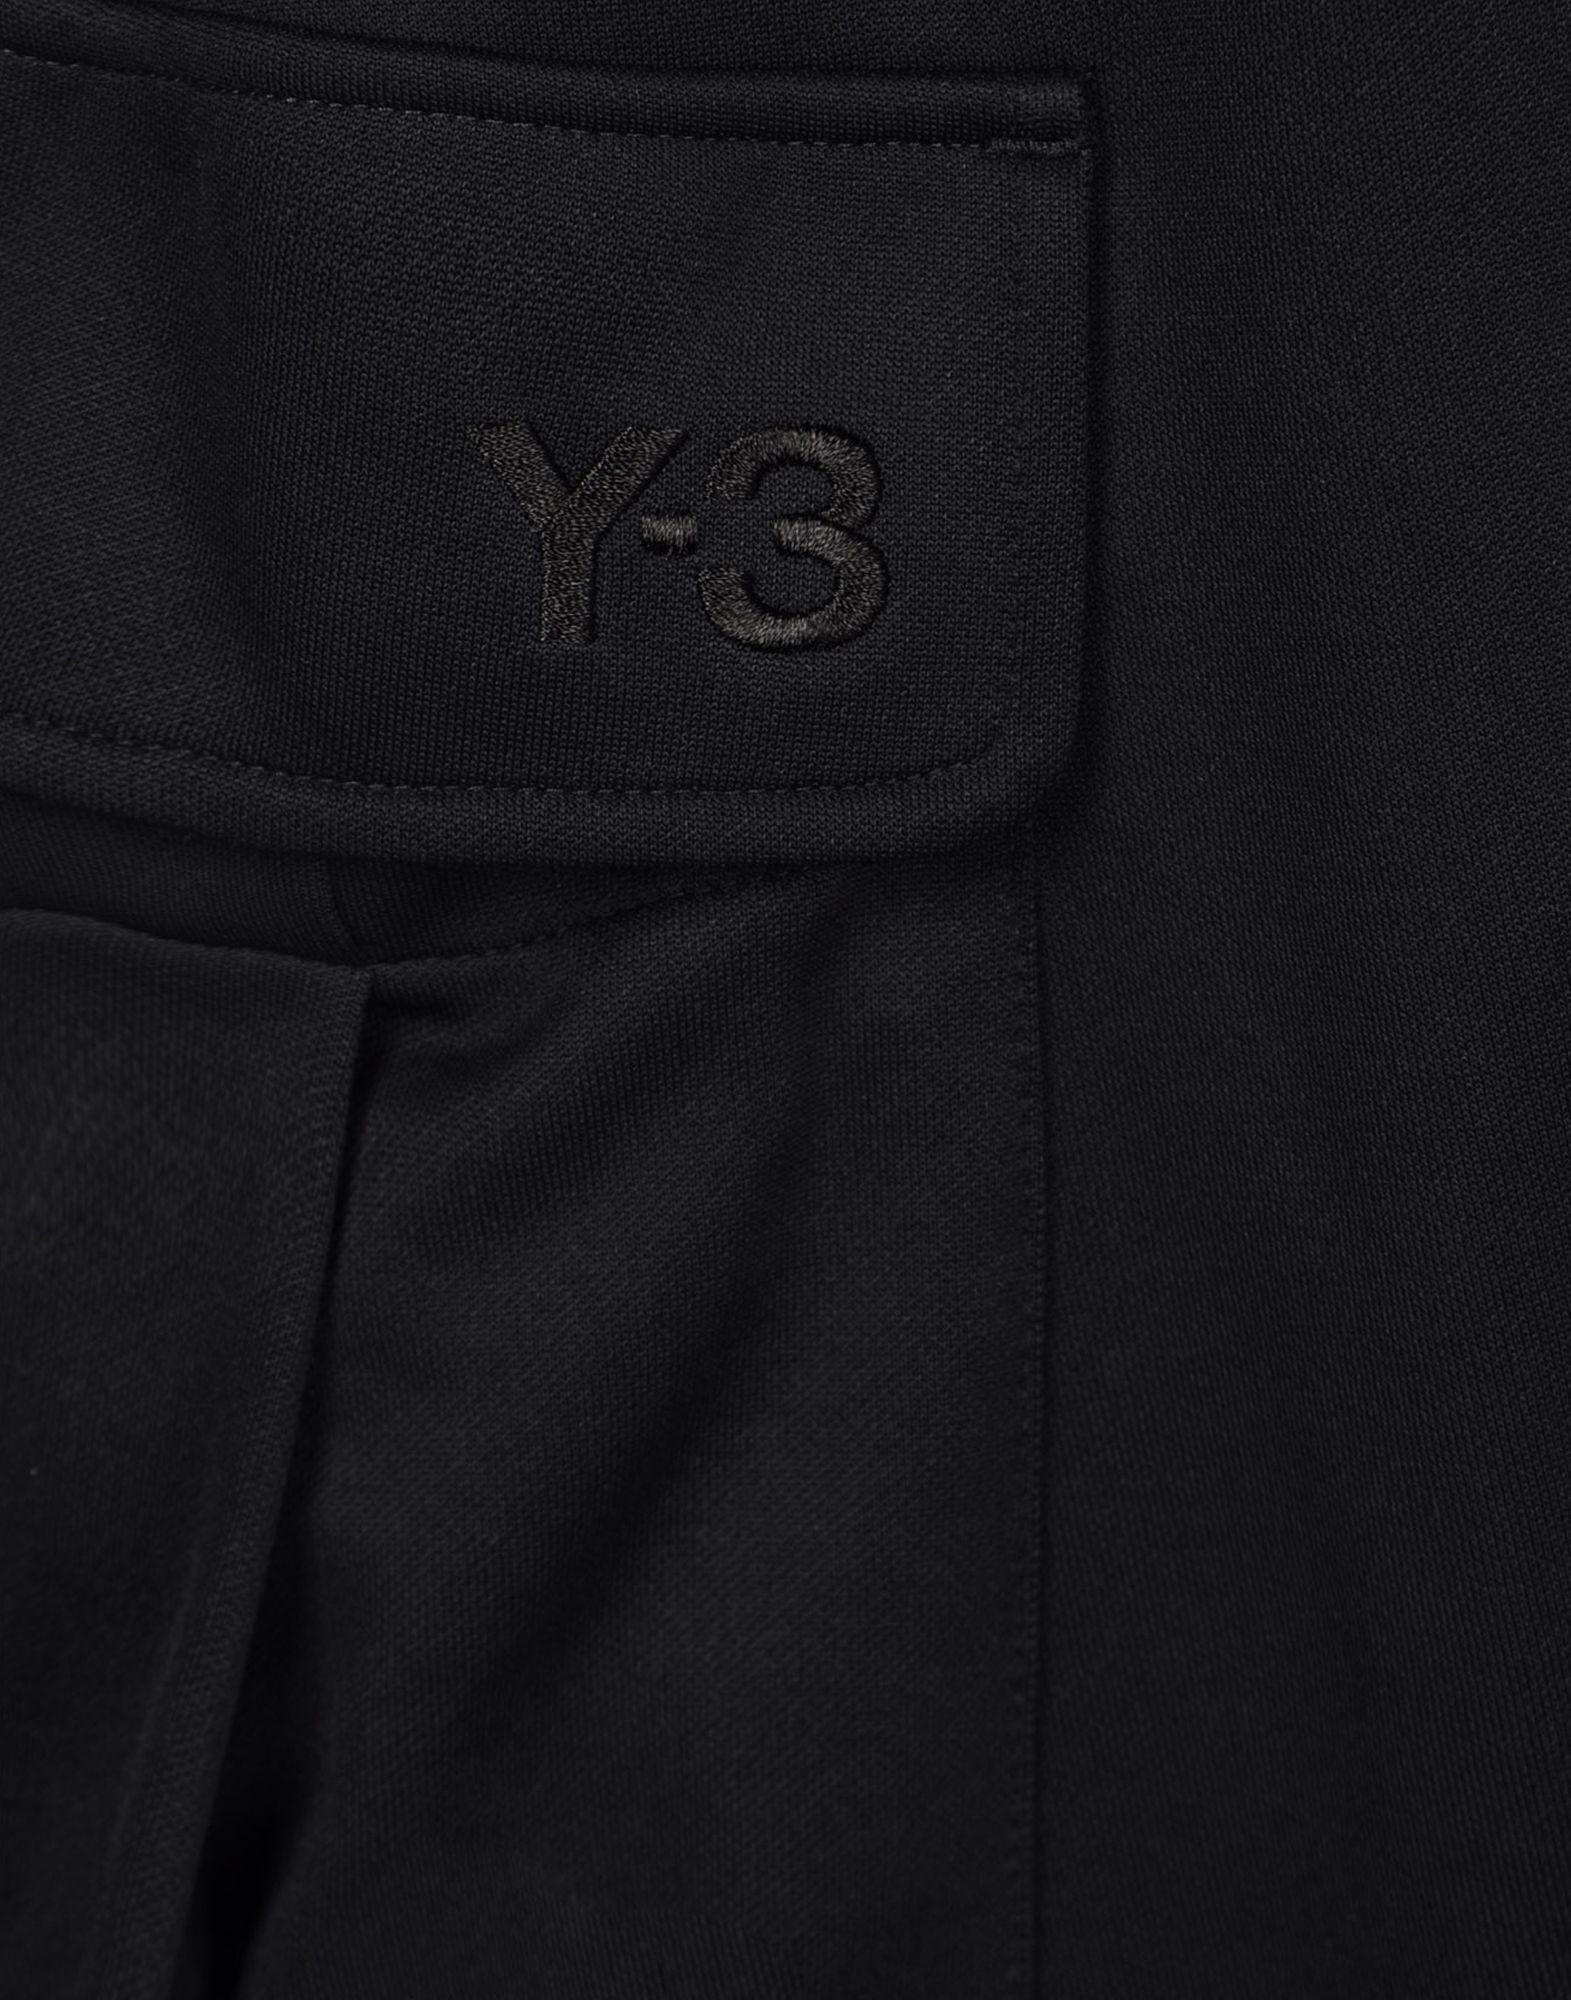 Y 3 Track Sarouel Shorts for Women | Adidas Y-3 Official Store